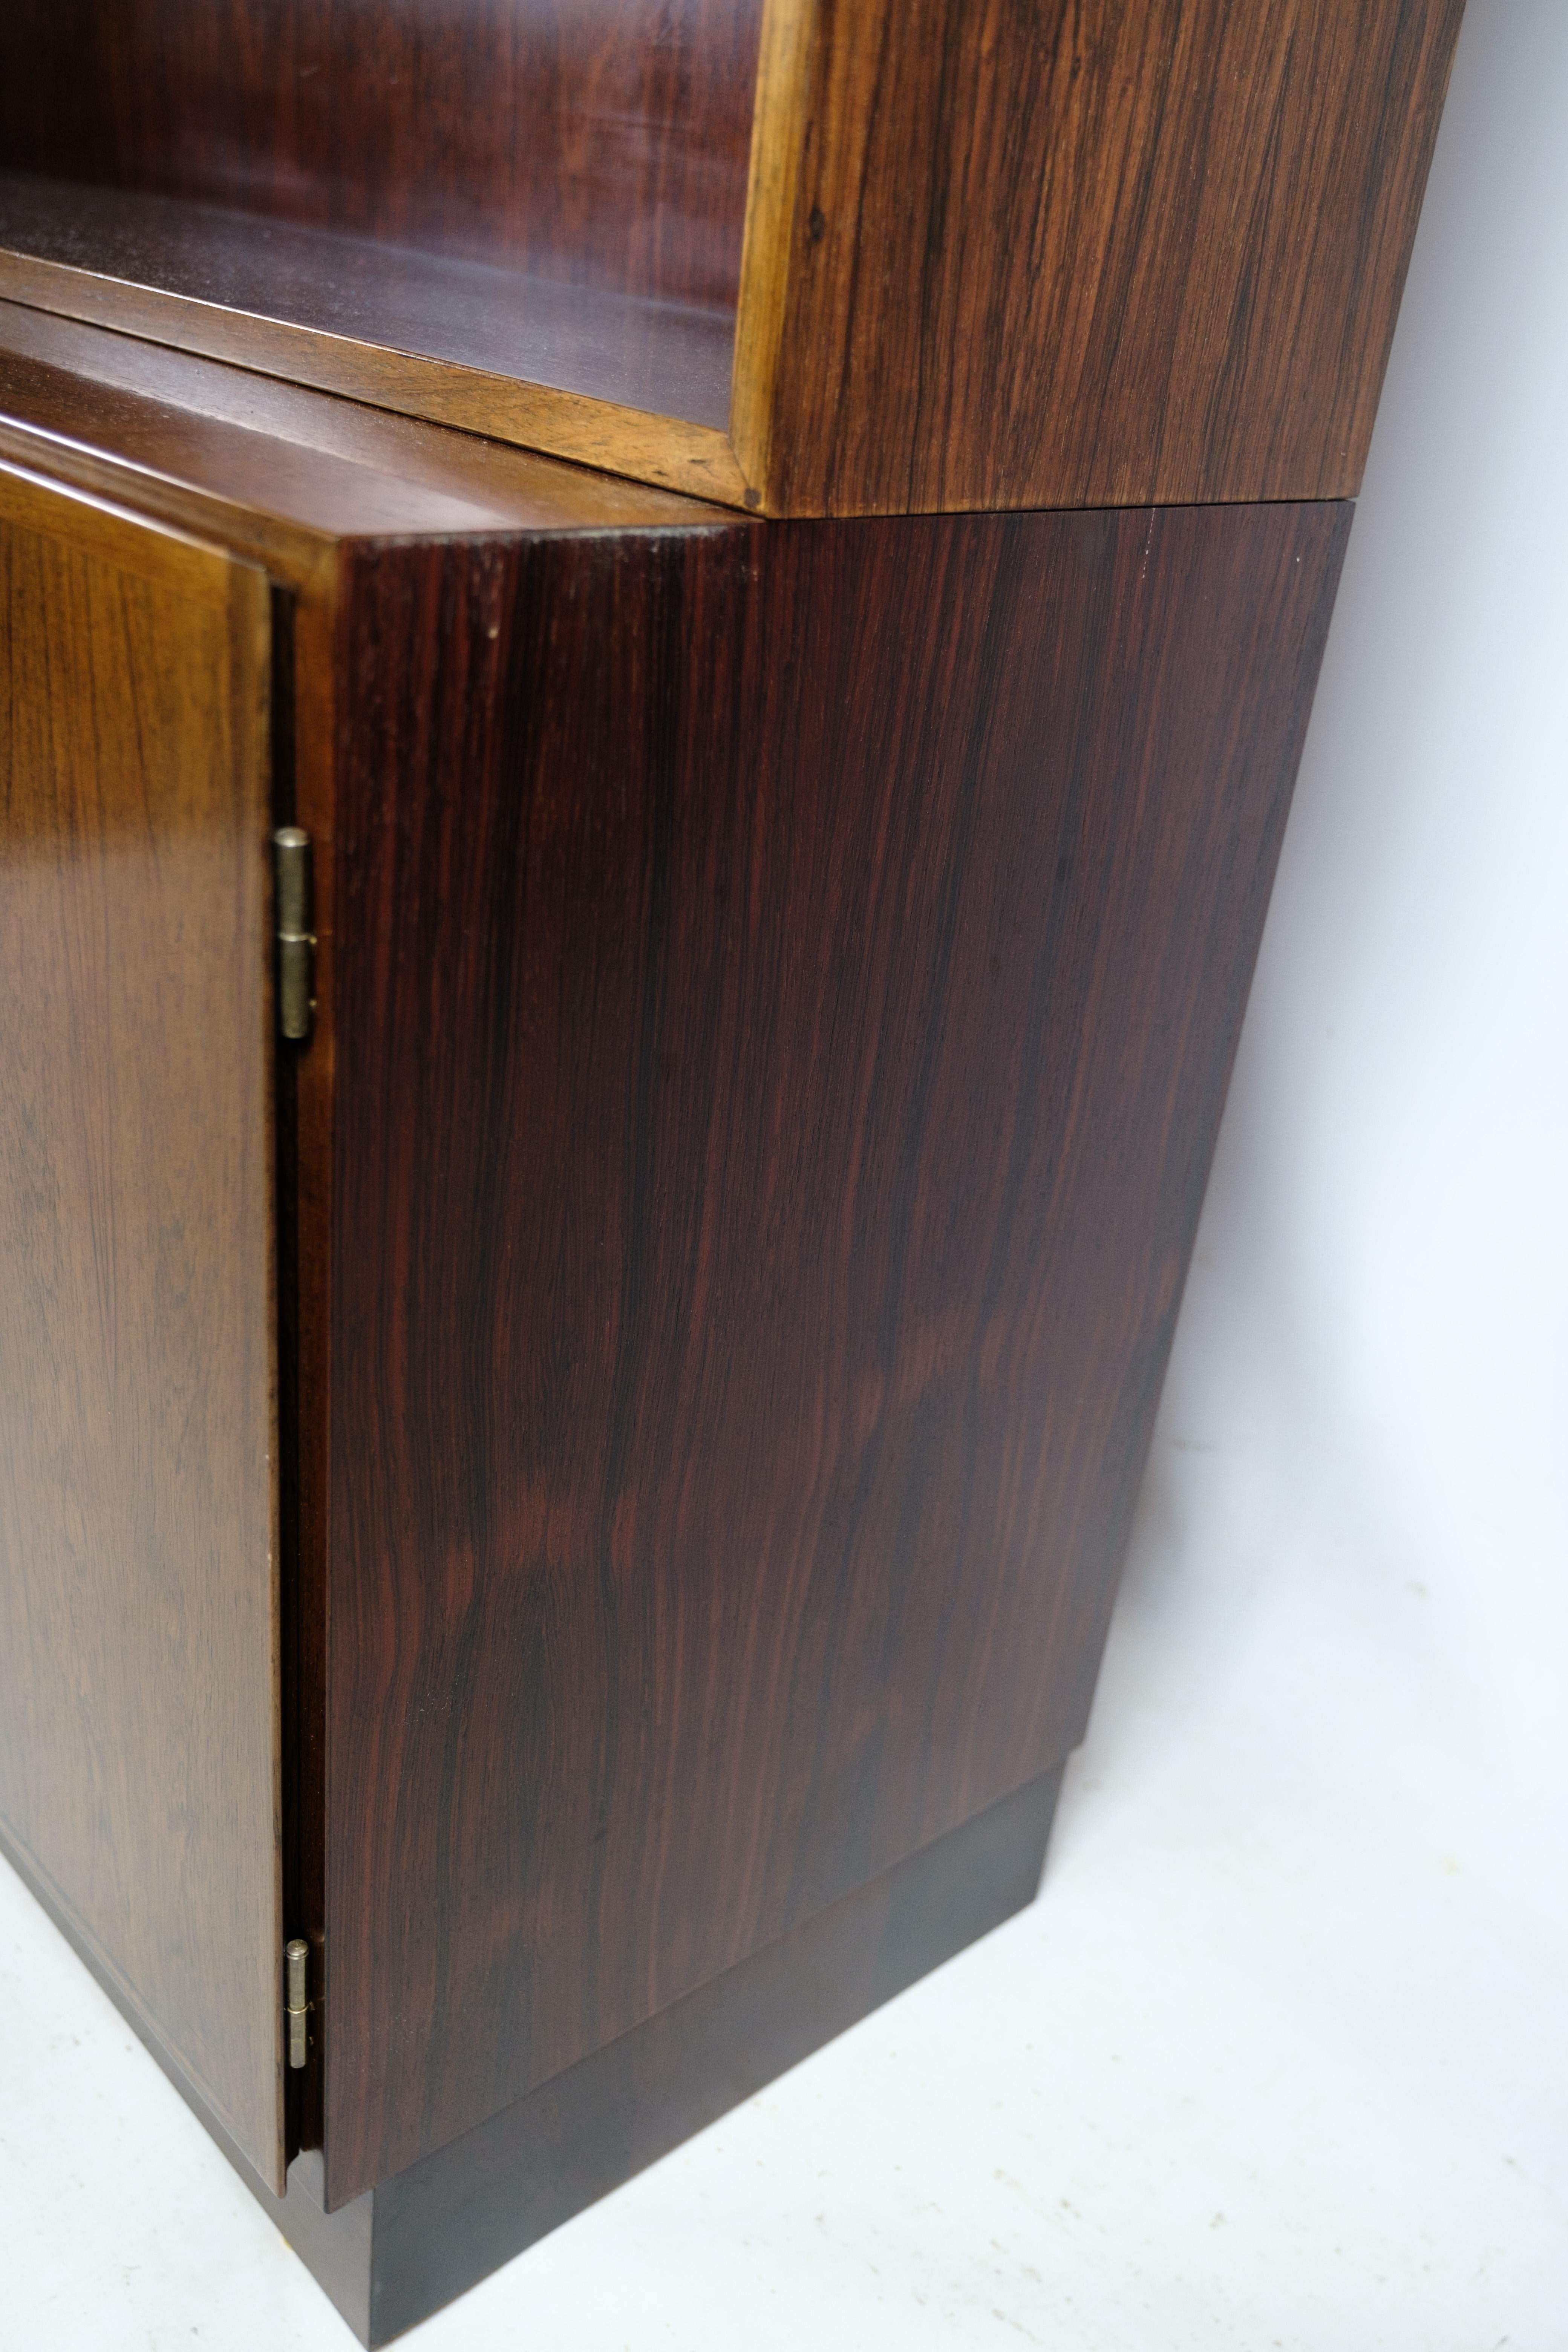 Mid-20th Century Shelving System Model 9 Made In Rosewood By Omann Juniors Møbelfabrik From 1960s For Sale